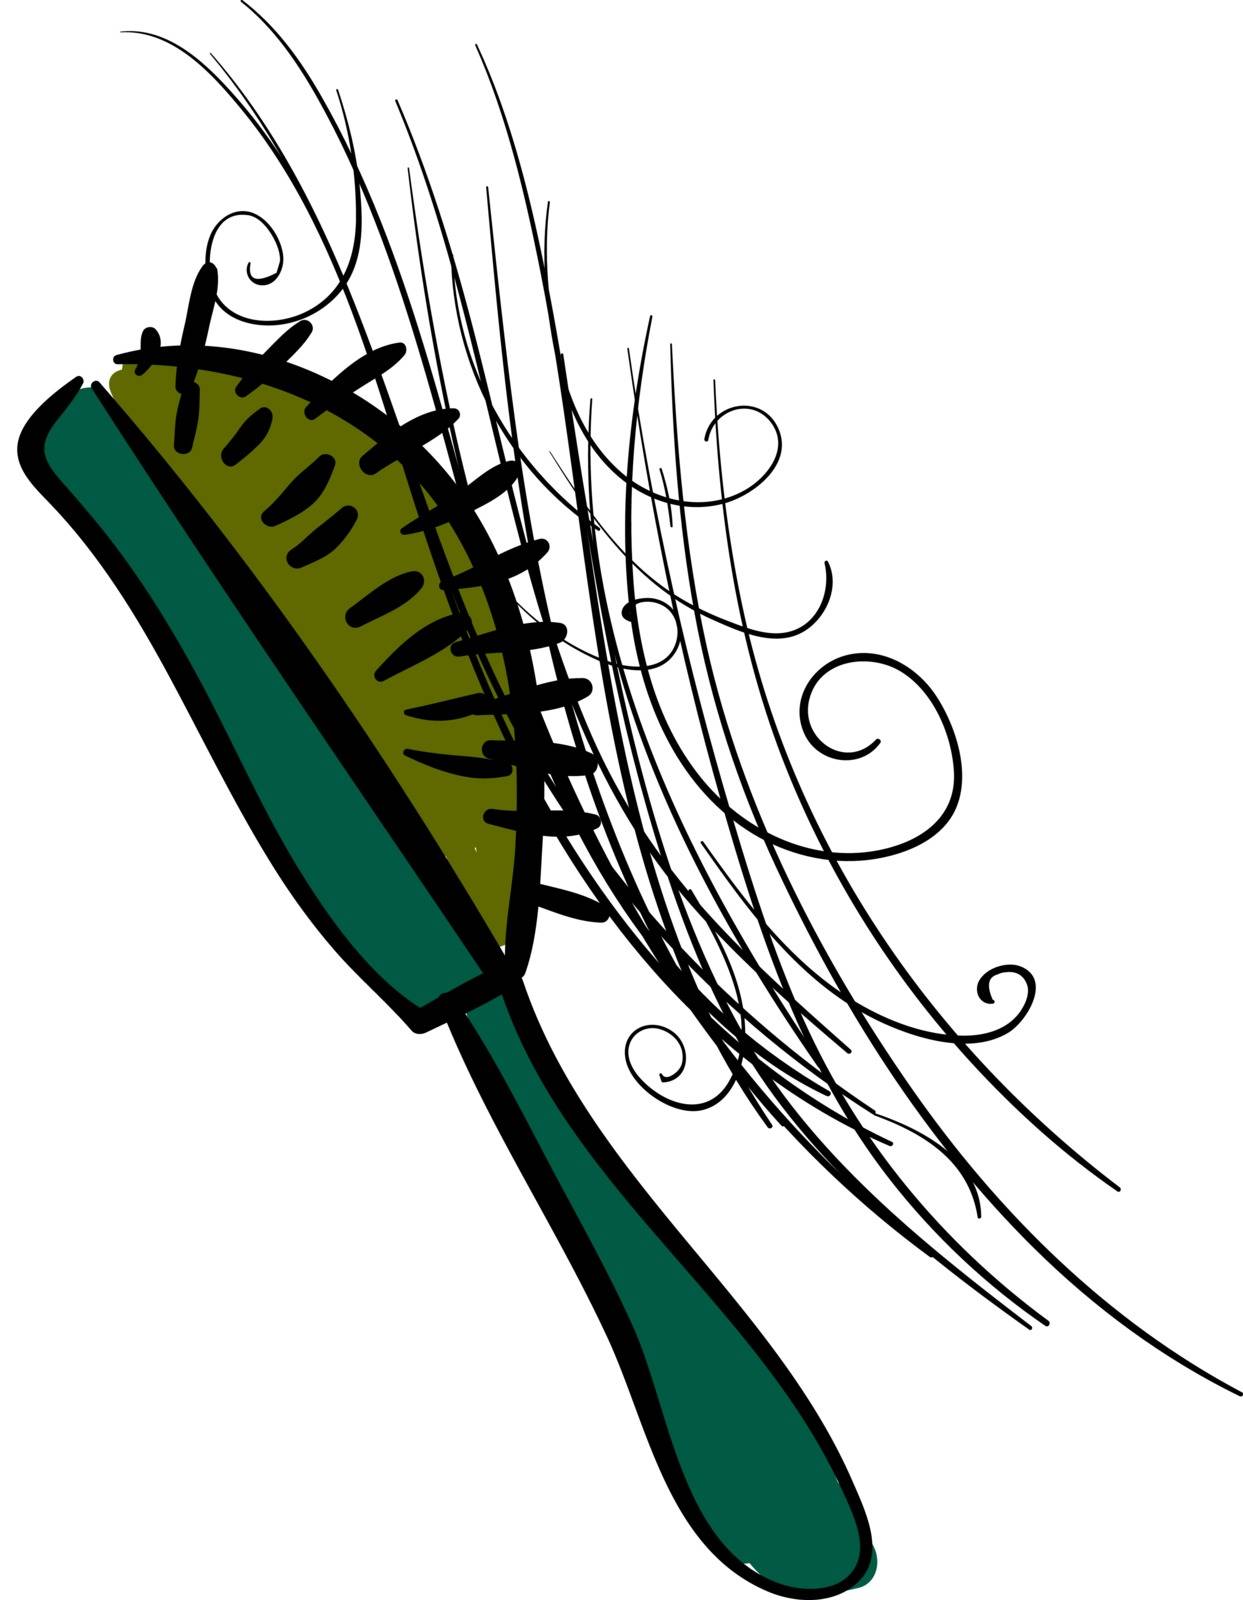 Green comb with hair, illustration, vector on white background.